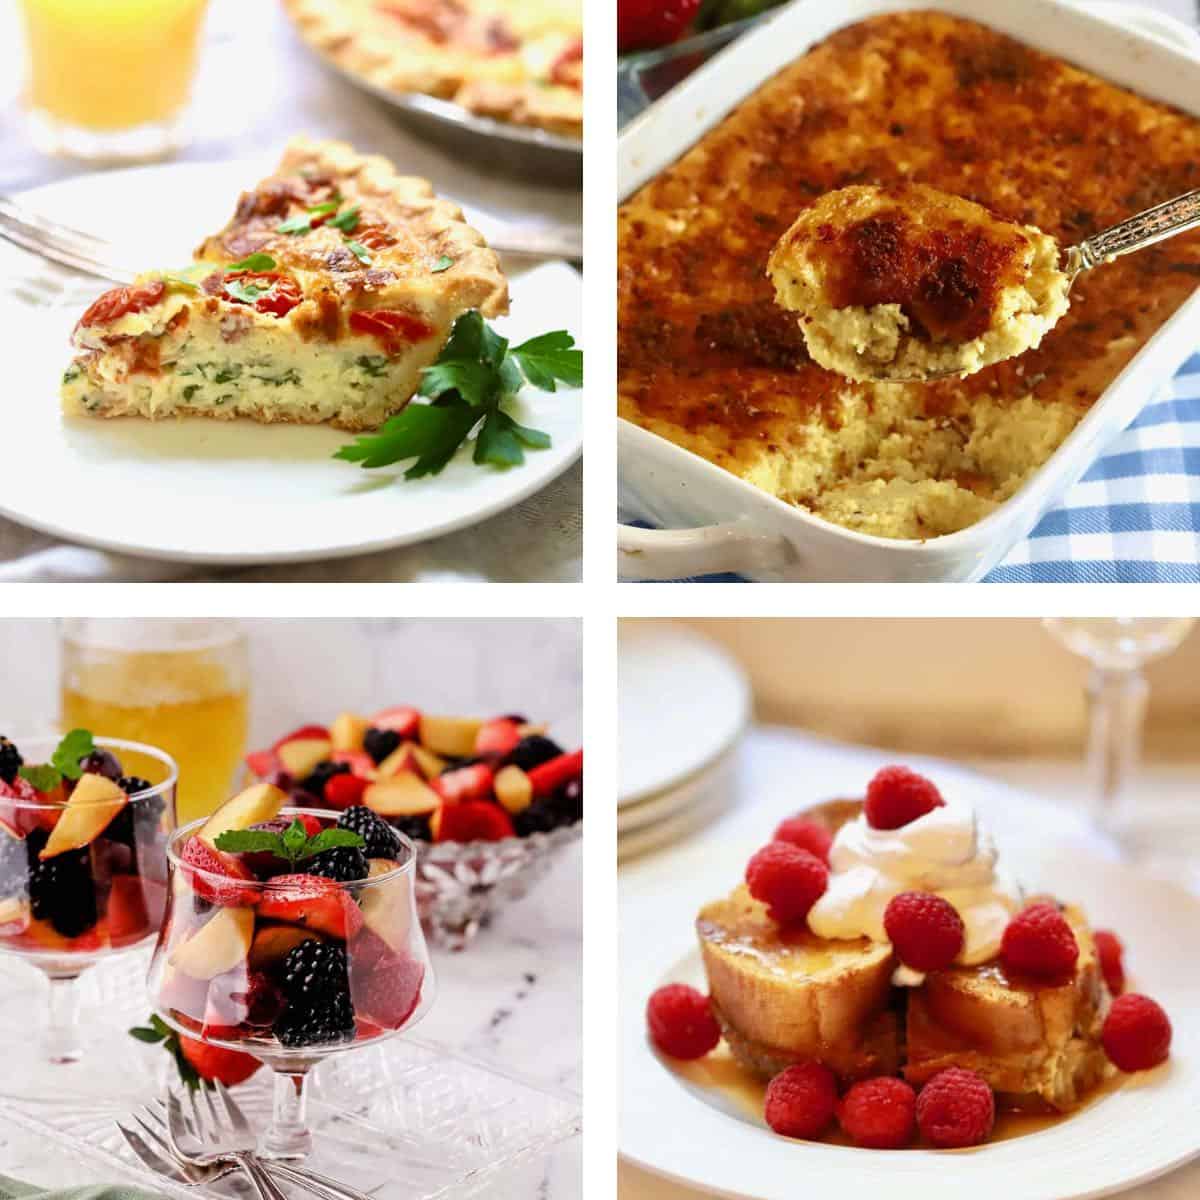 Four brunch dishes, including quiche, fruit salad, and grits casserole. 